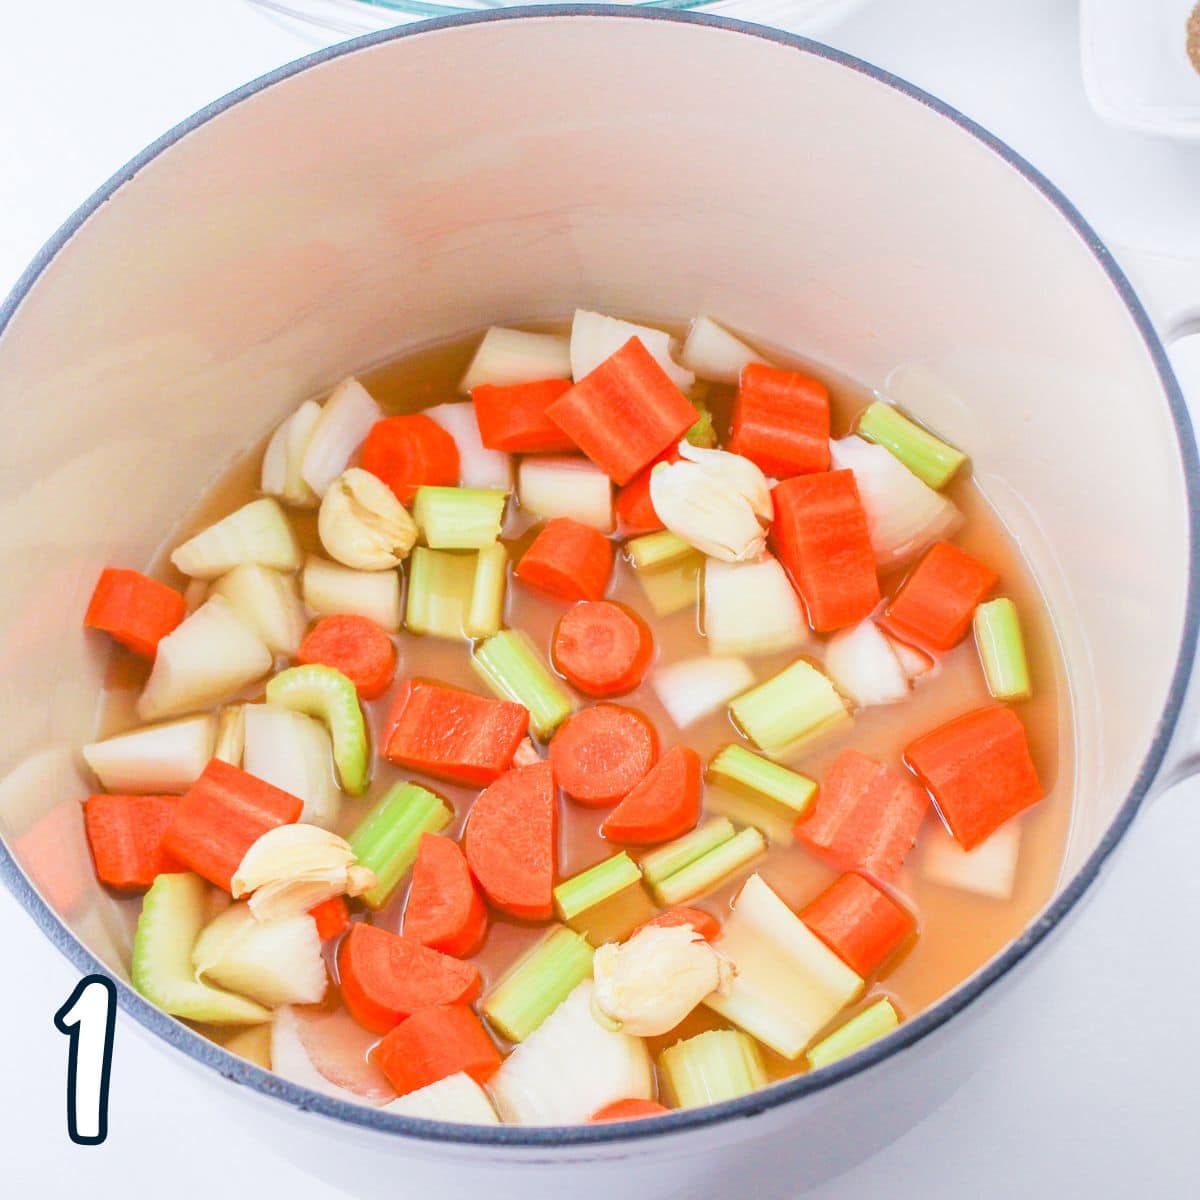 A pot filled with broth, carrots and celery.